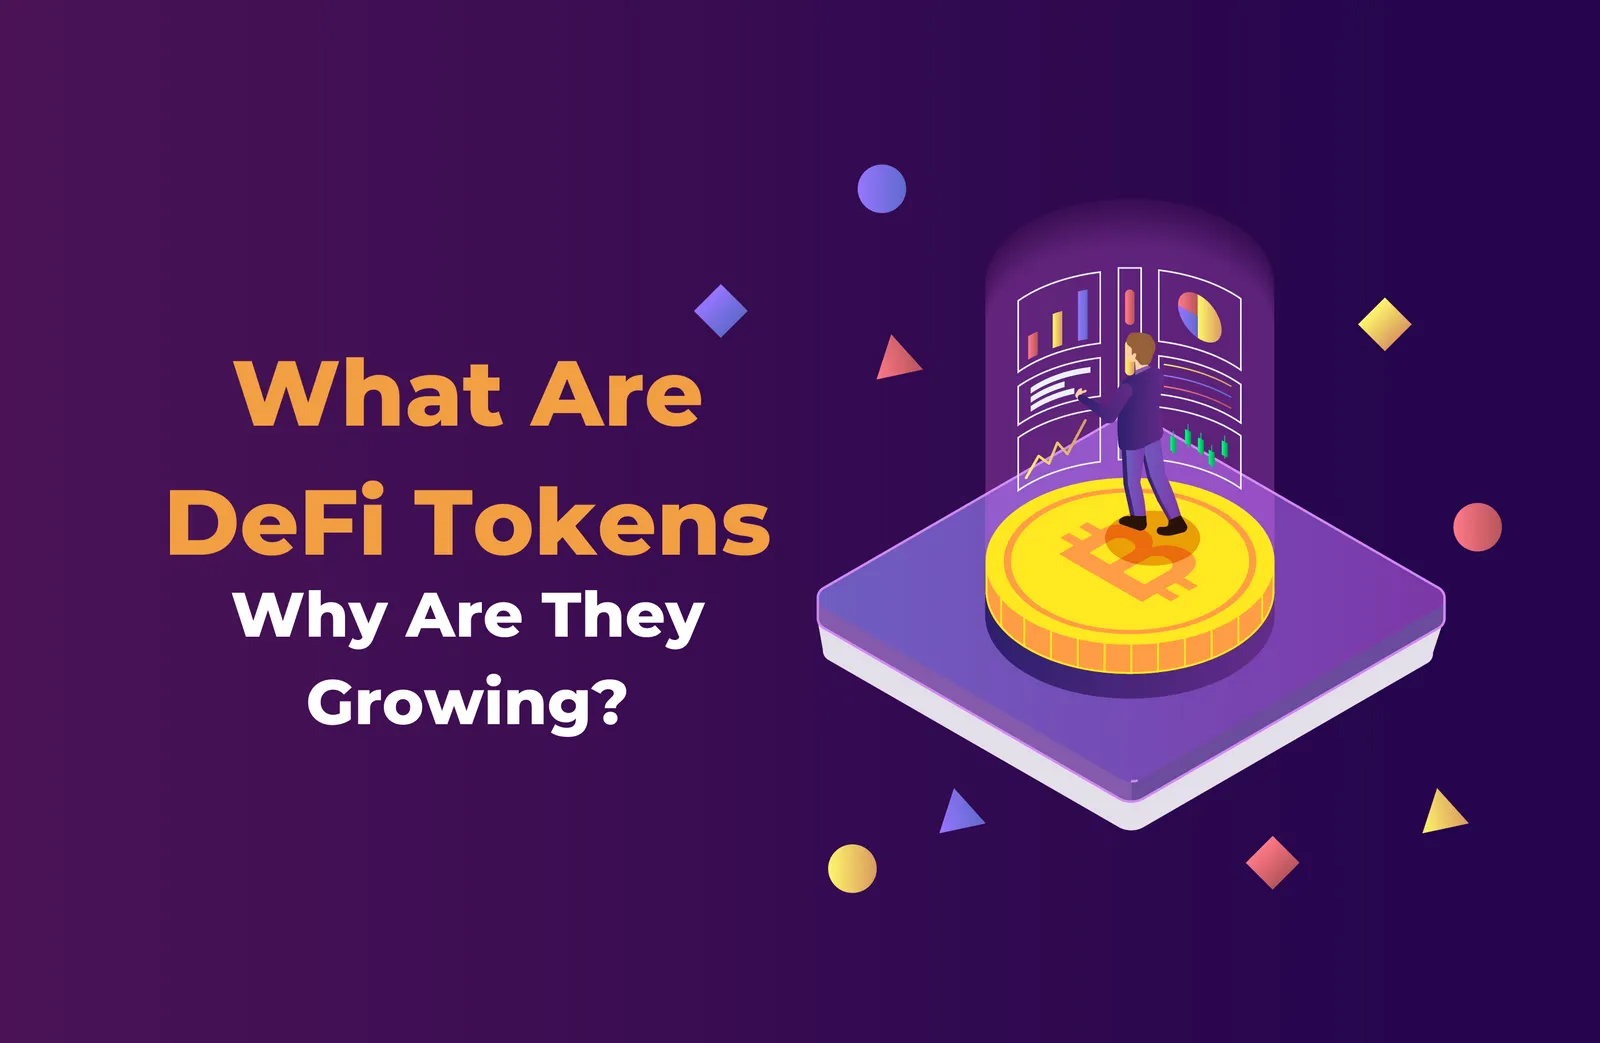 What are DeFi tokens and how do they operate?